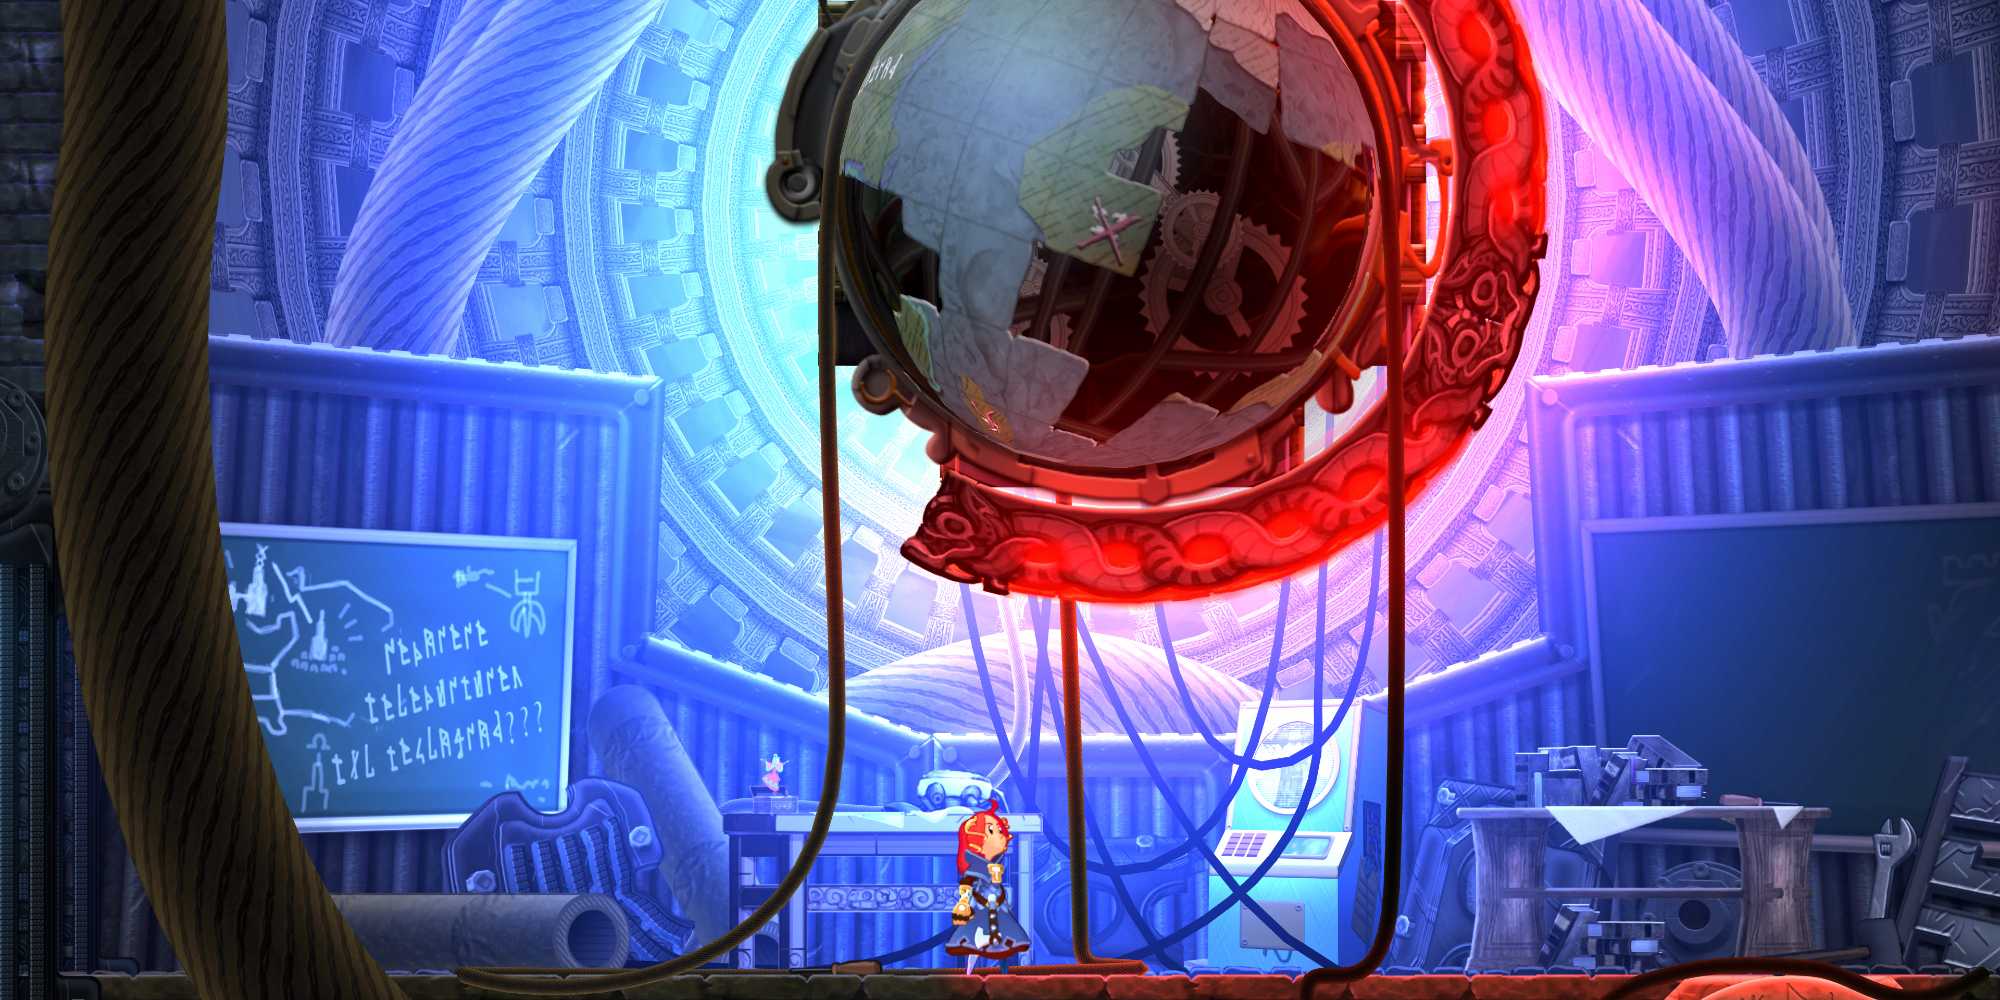 Teslagrad 2 Review: Fluid Movement & Clunky Physics